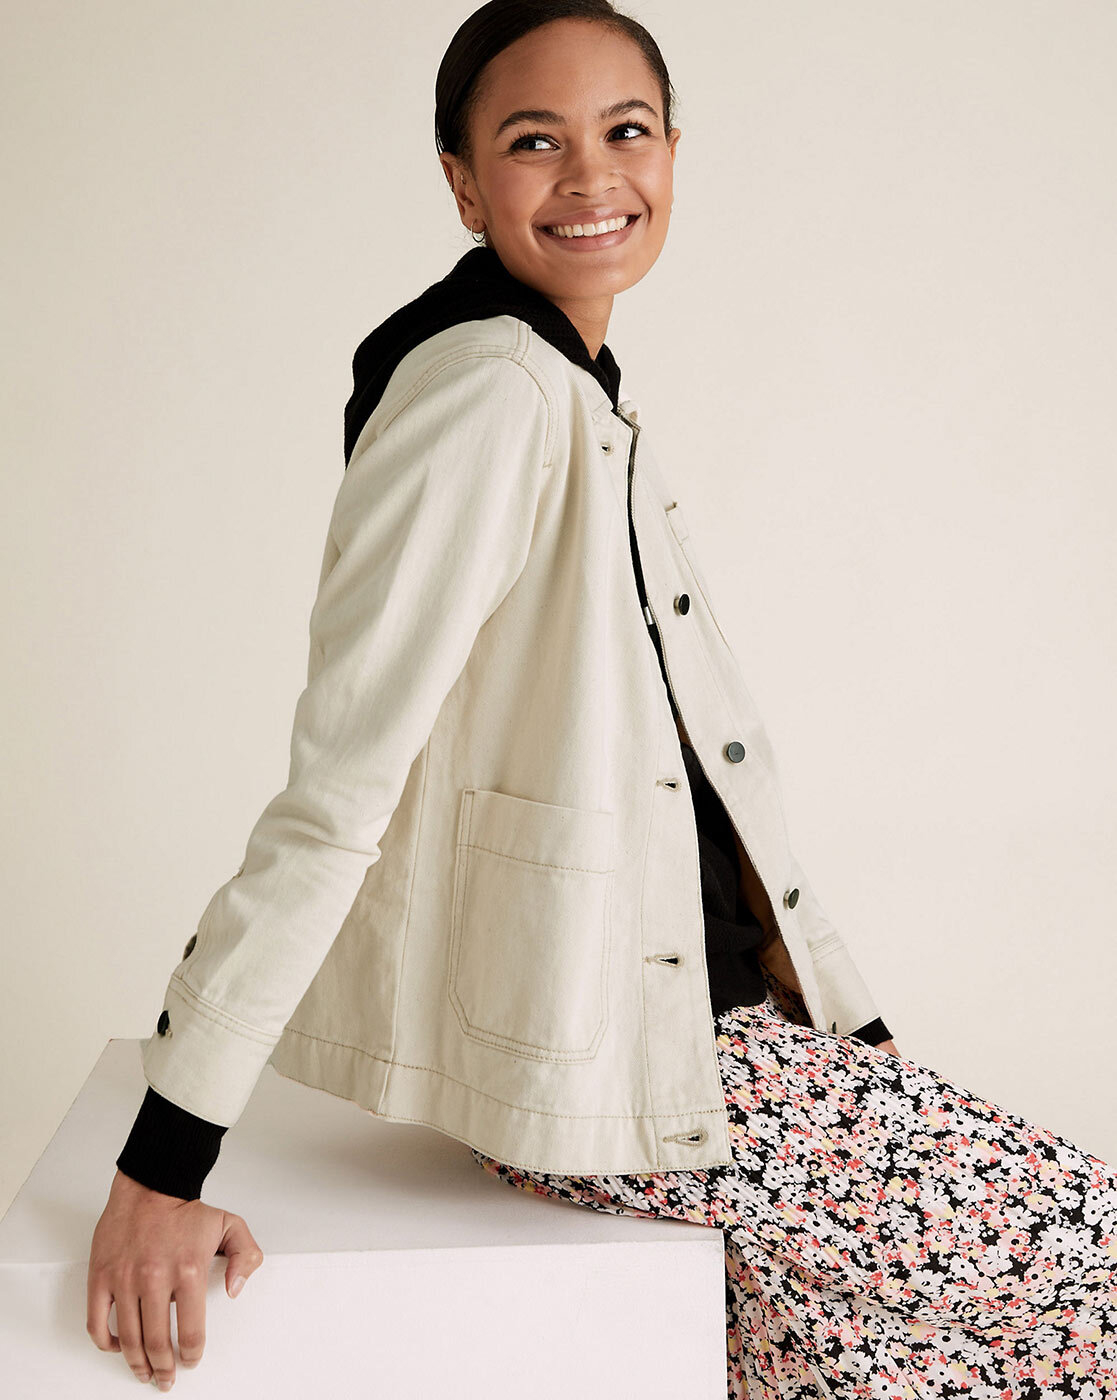 Marks And Spencer Coats Cheap Buying, Save 61% | jlcatj.gob.mx